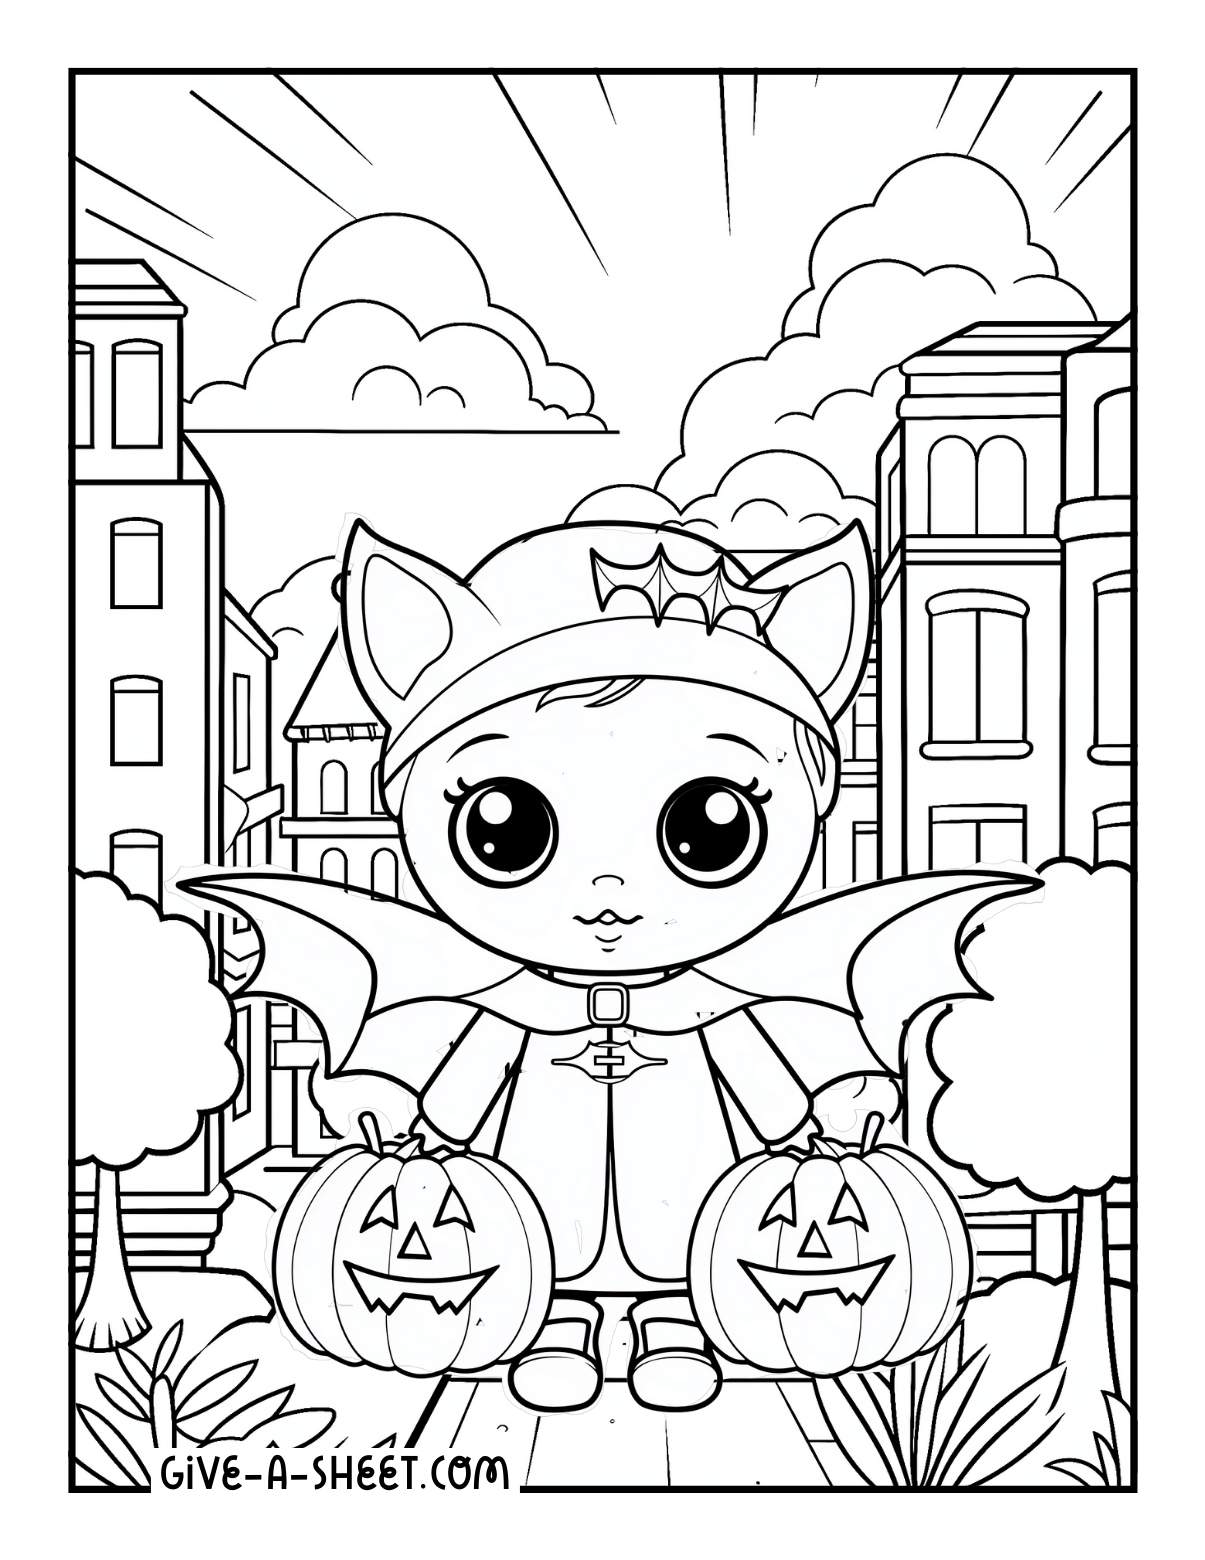 Halloween bats coloring page for kids of all ages.